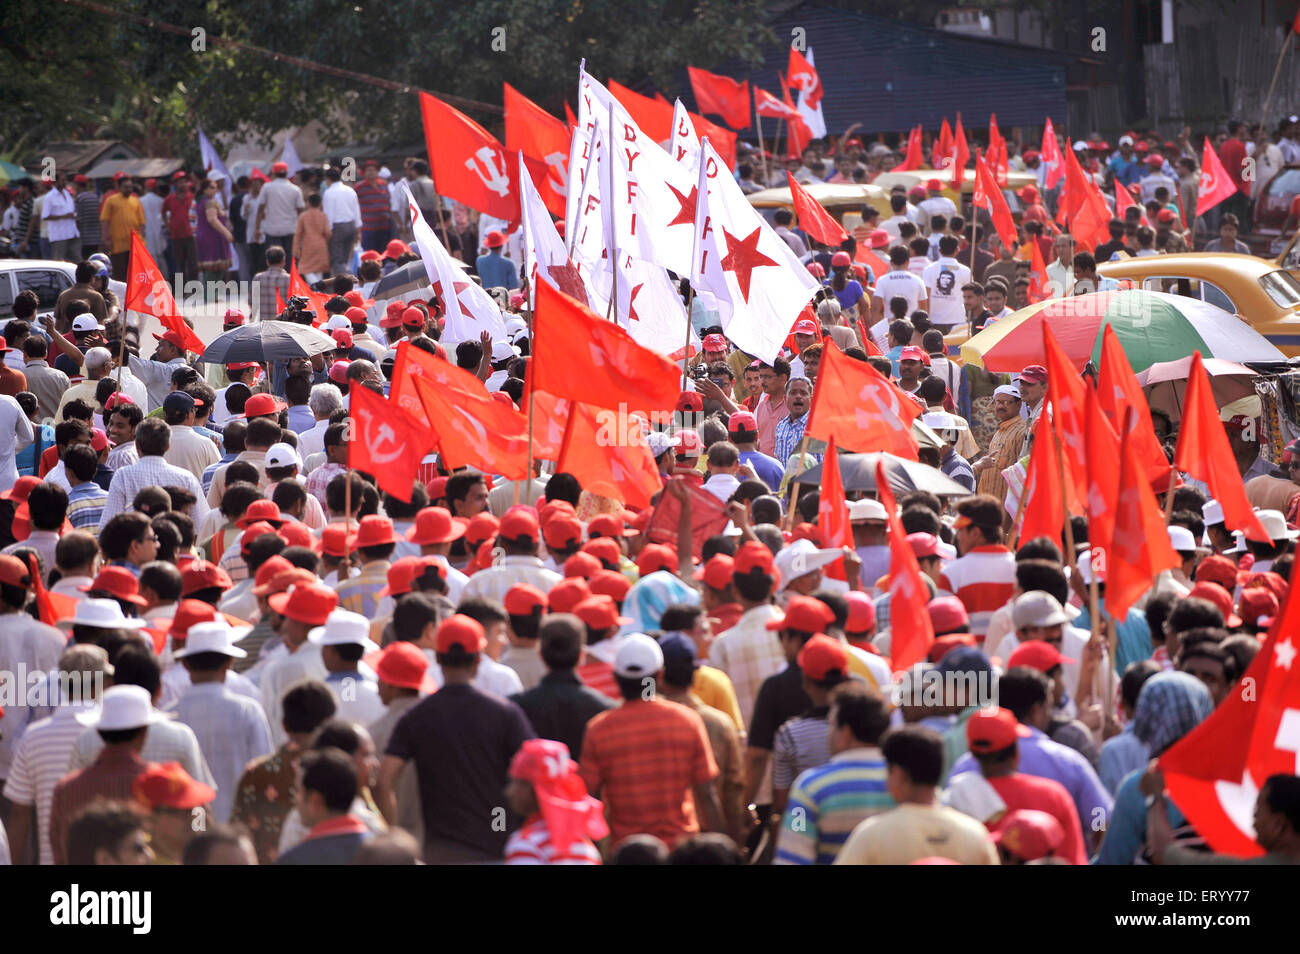 CPM, Communist Party of India, Marxist, political party, election campaign rally with party flags symbols, Calcutta, Kolkata, West Bengal, India, Asia Stock Photo